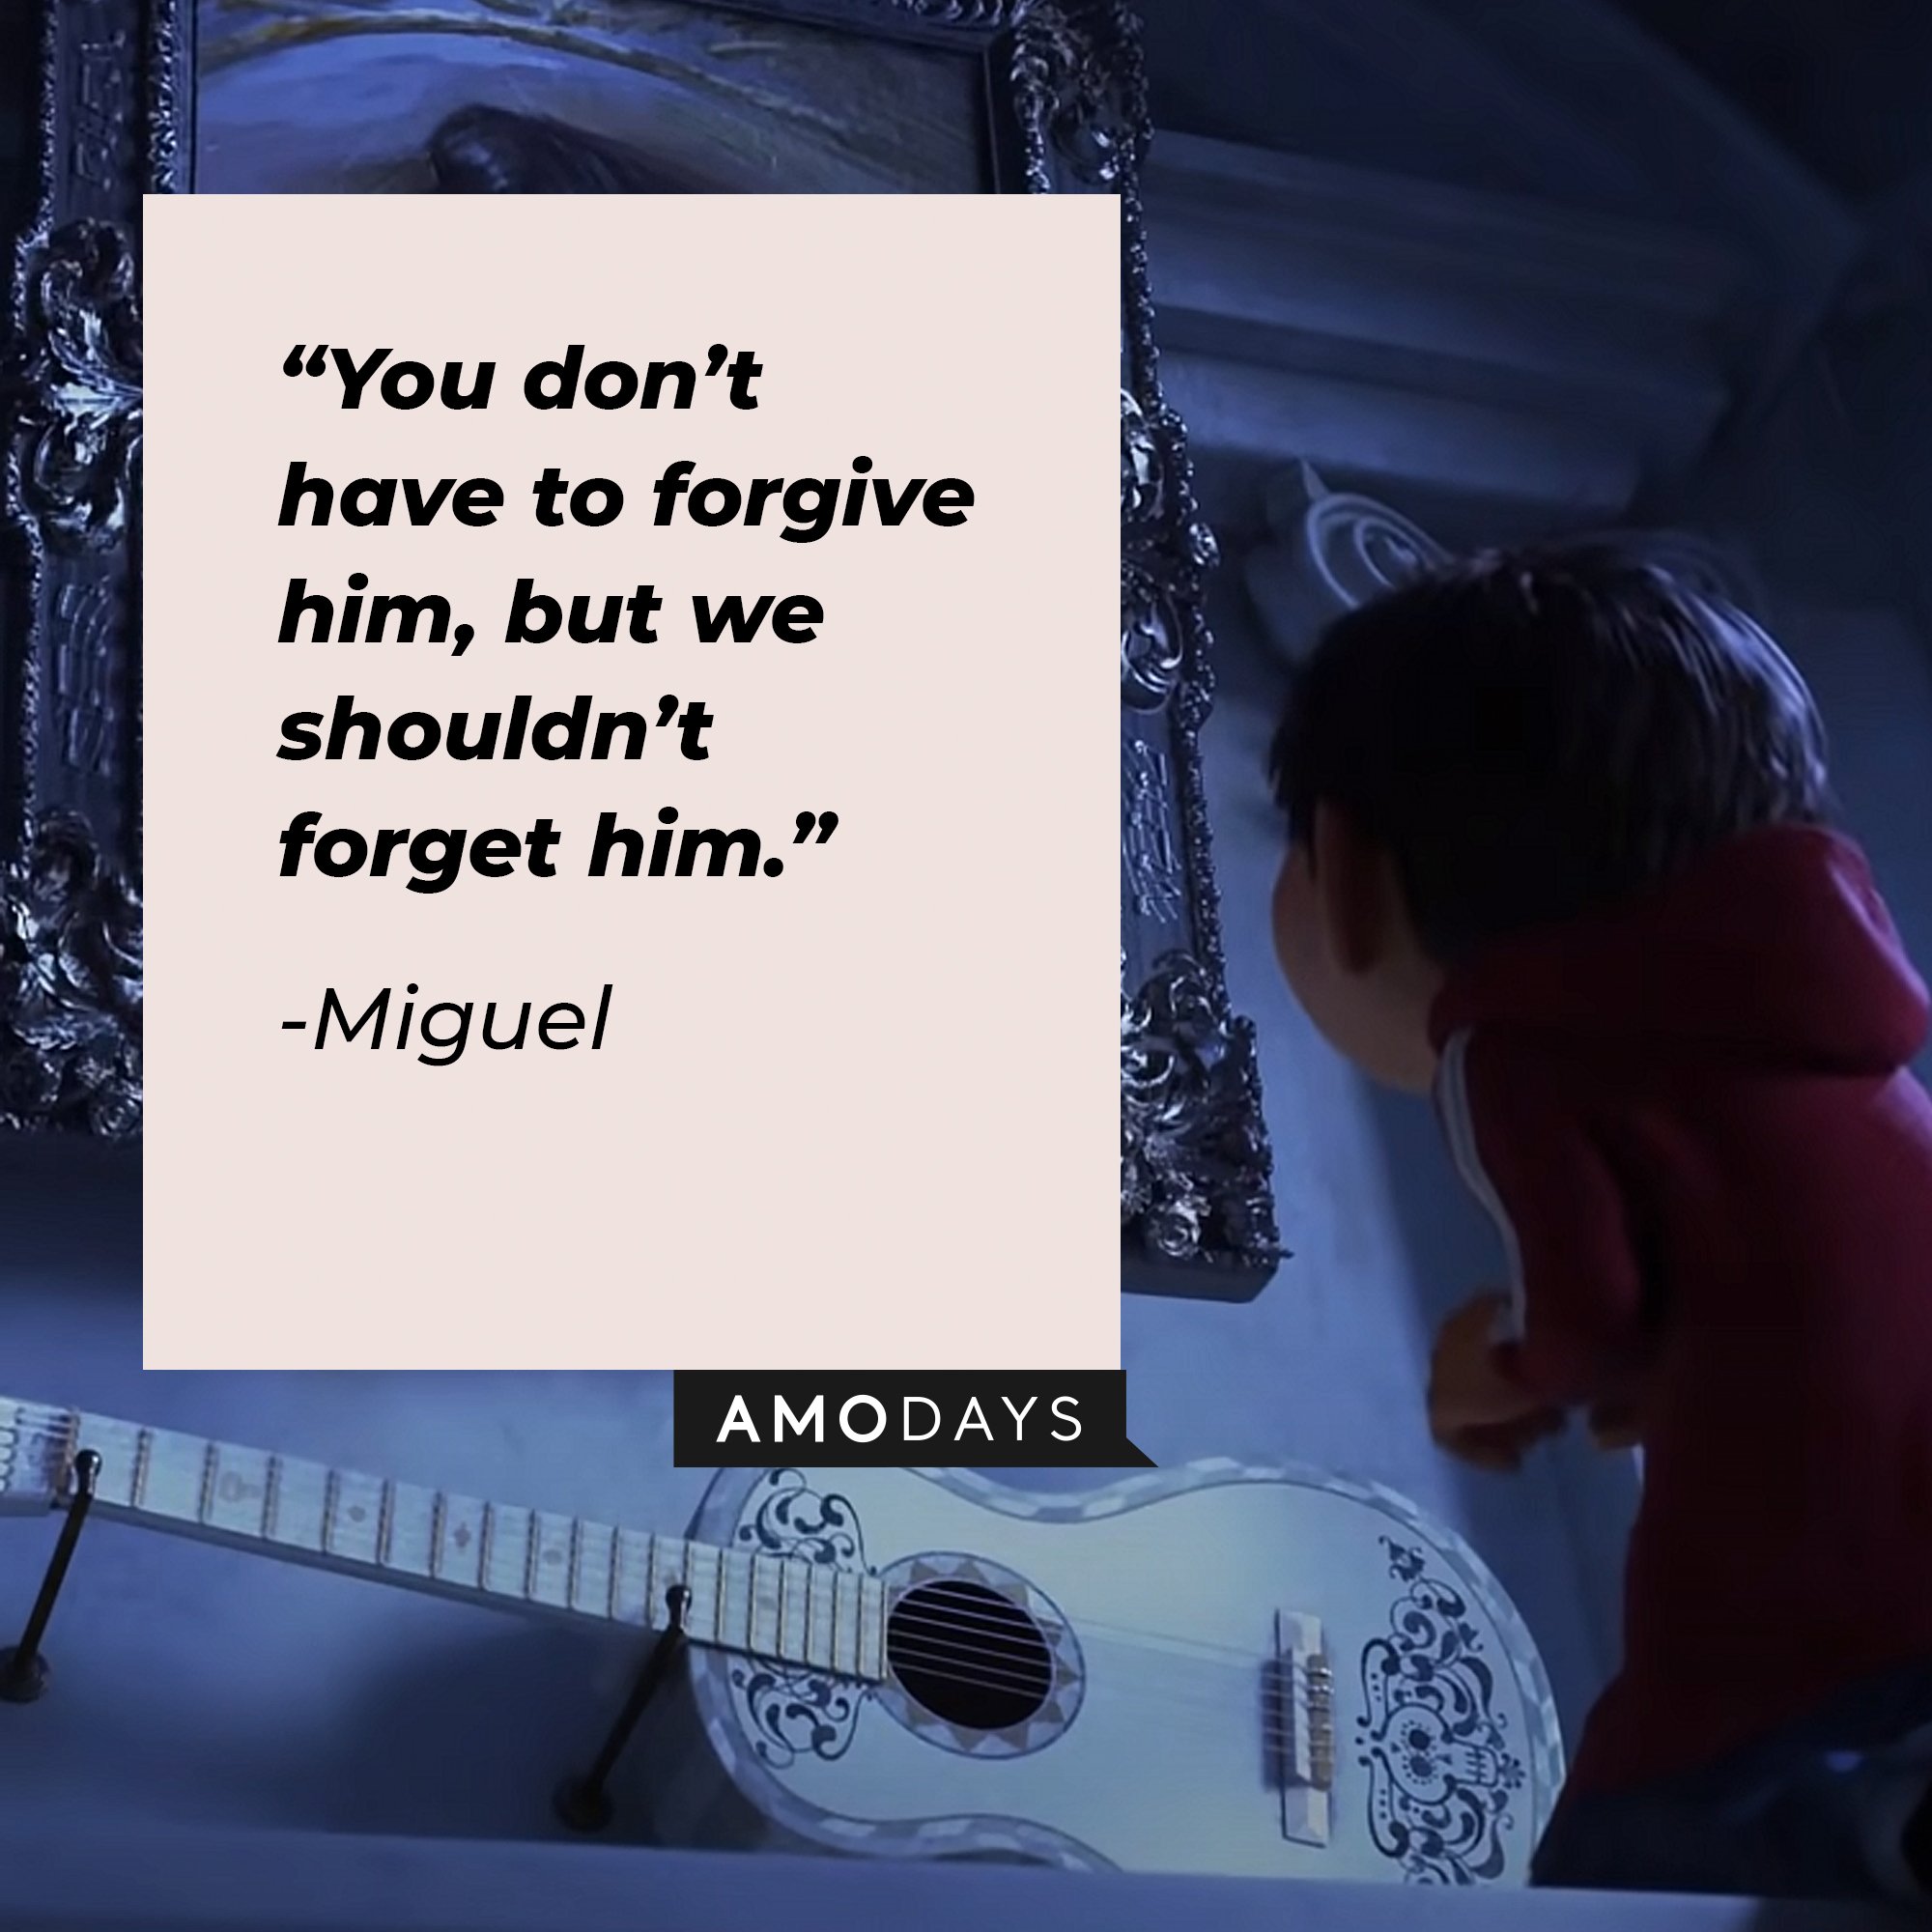 Miguel's quote: “You don’t have to forgive him, but we shouldn’t forget him.” | Image: AmoDays